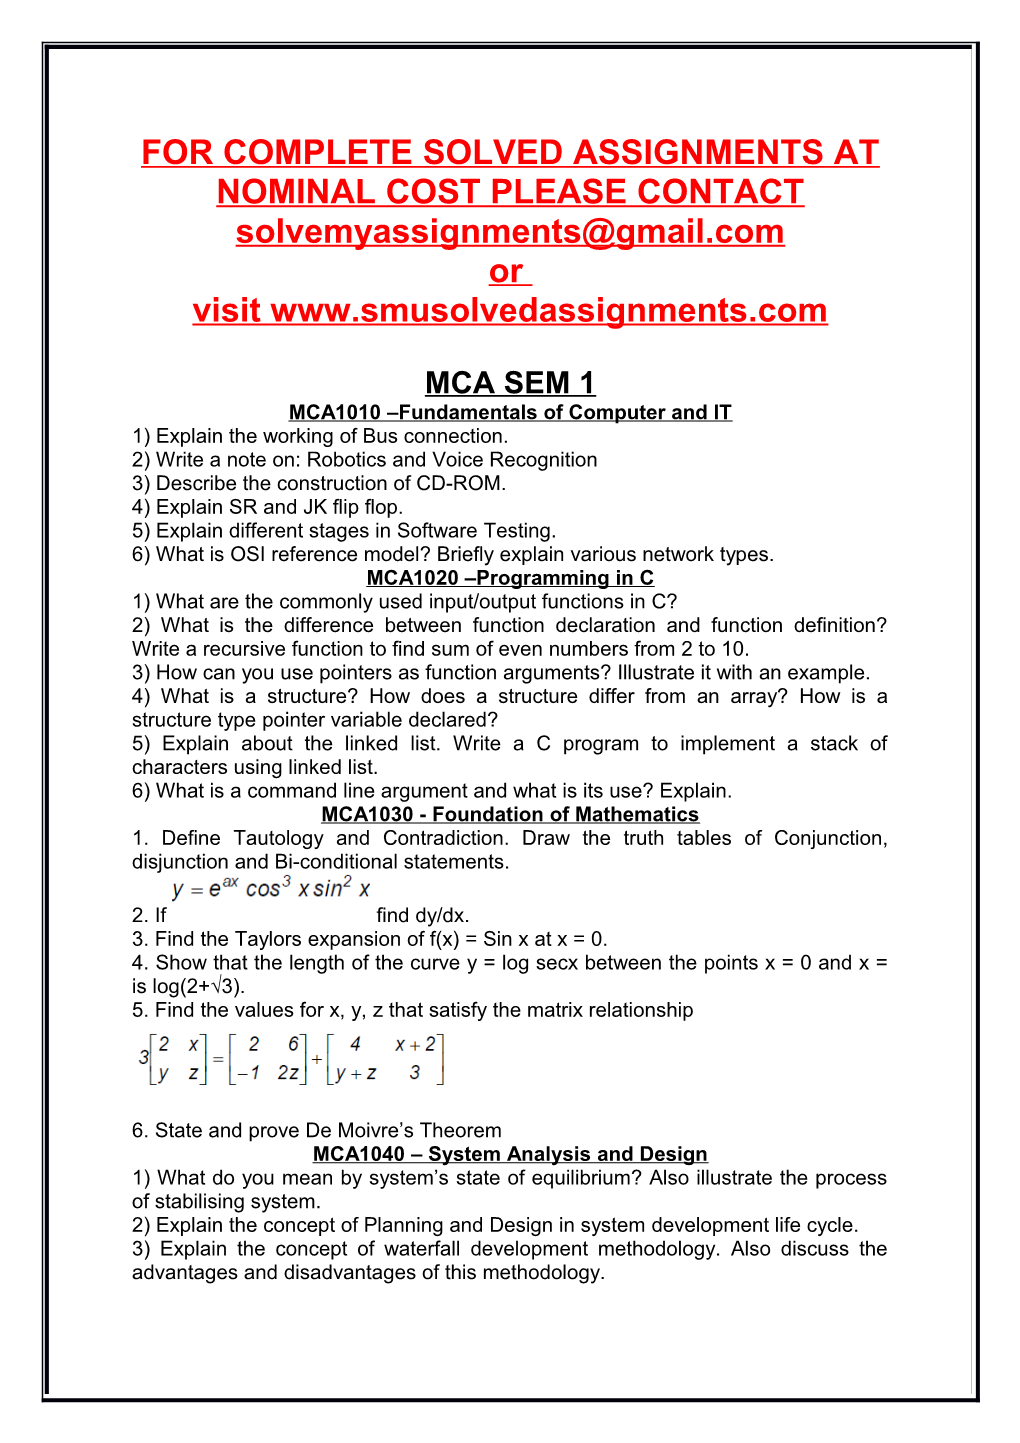 For Complete Solved Assignments at Nominal Cost Please Contact